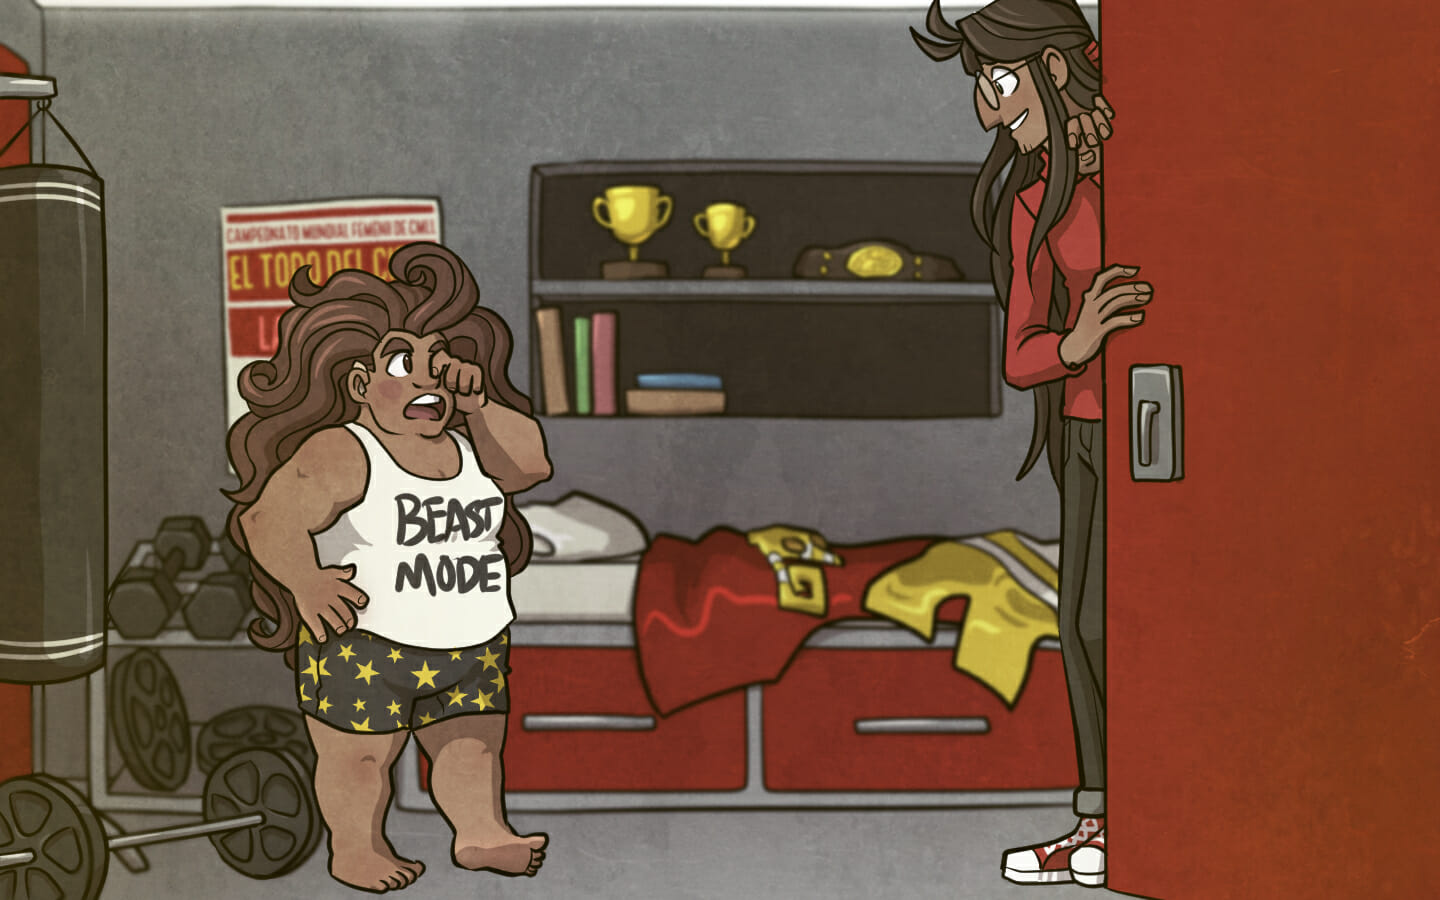 Gugalanna shows Tim into her room. She's wearing short shorts and a tank top that says "Beast Mode."